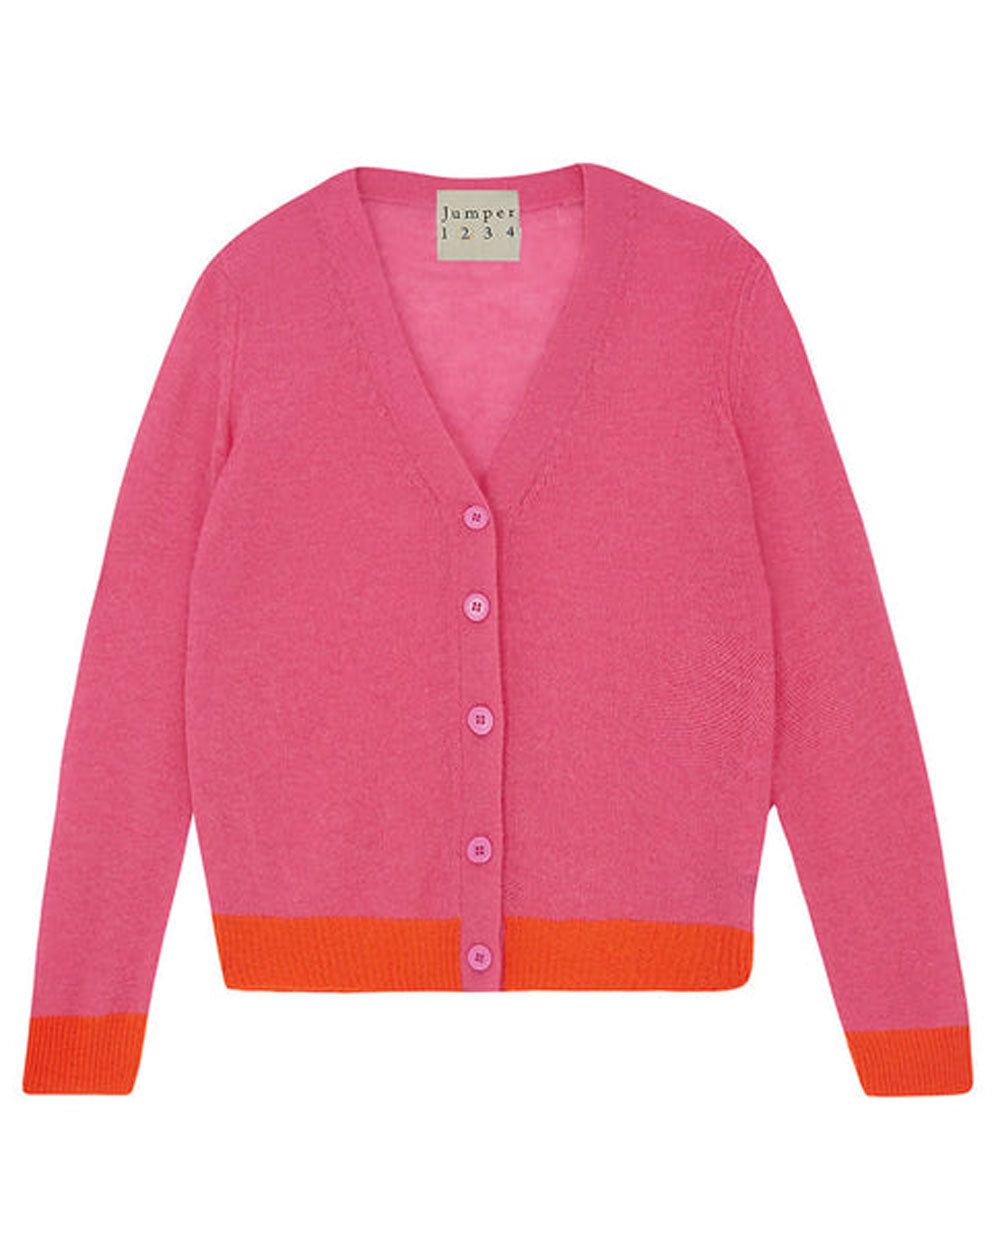 Candy Neon Contrast Cardigan